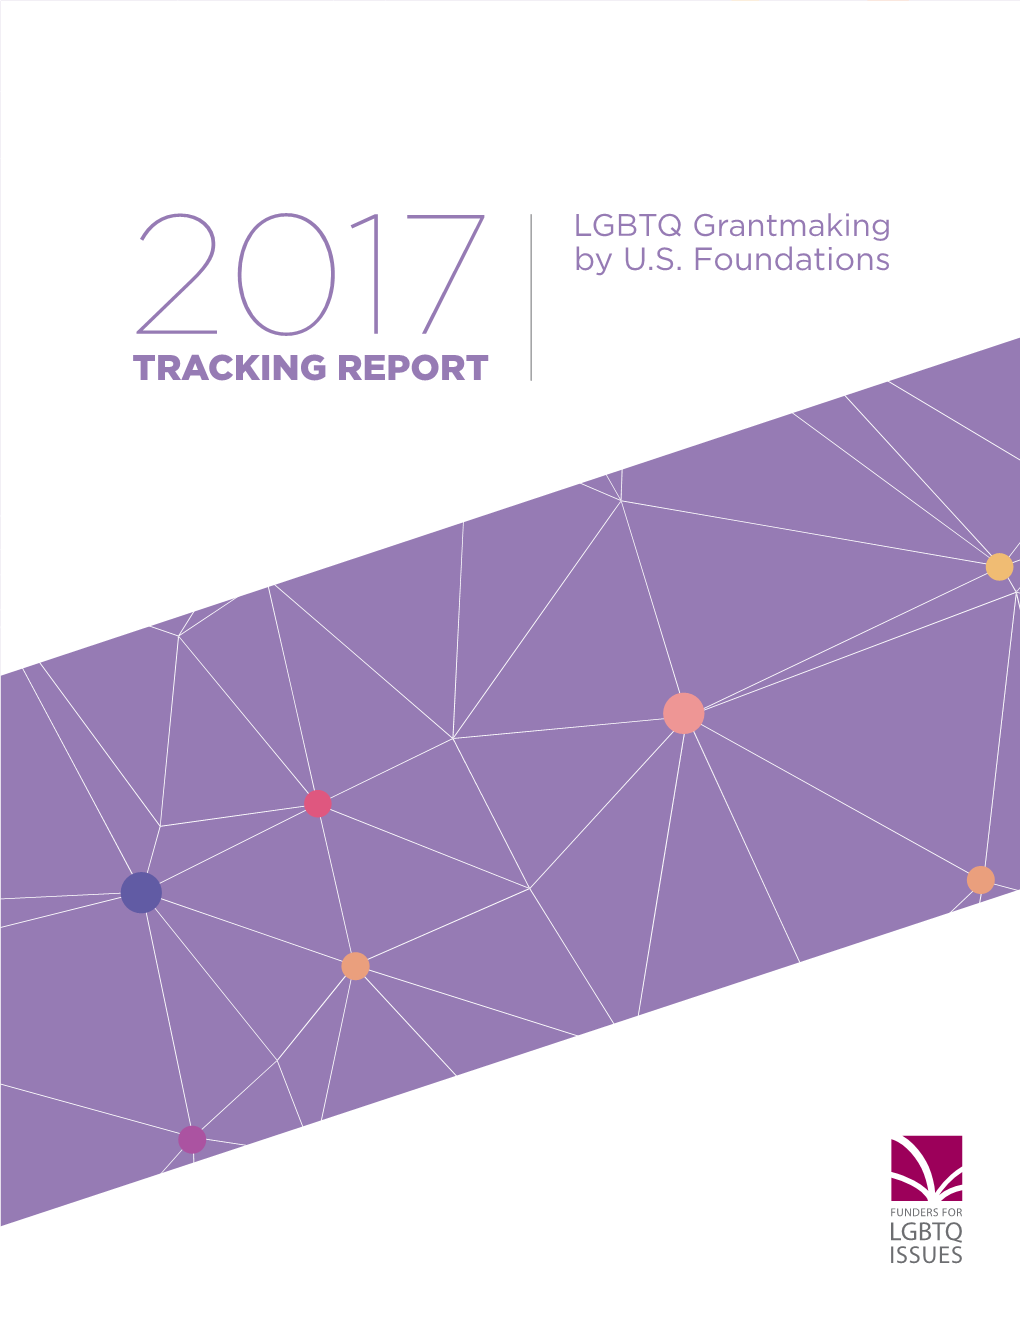 2017 Tracking Report: Lesbian, Gay, Bisexual, Transgender and Queer Grantmaking by U.S. Foundations